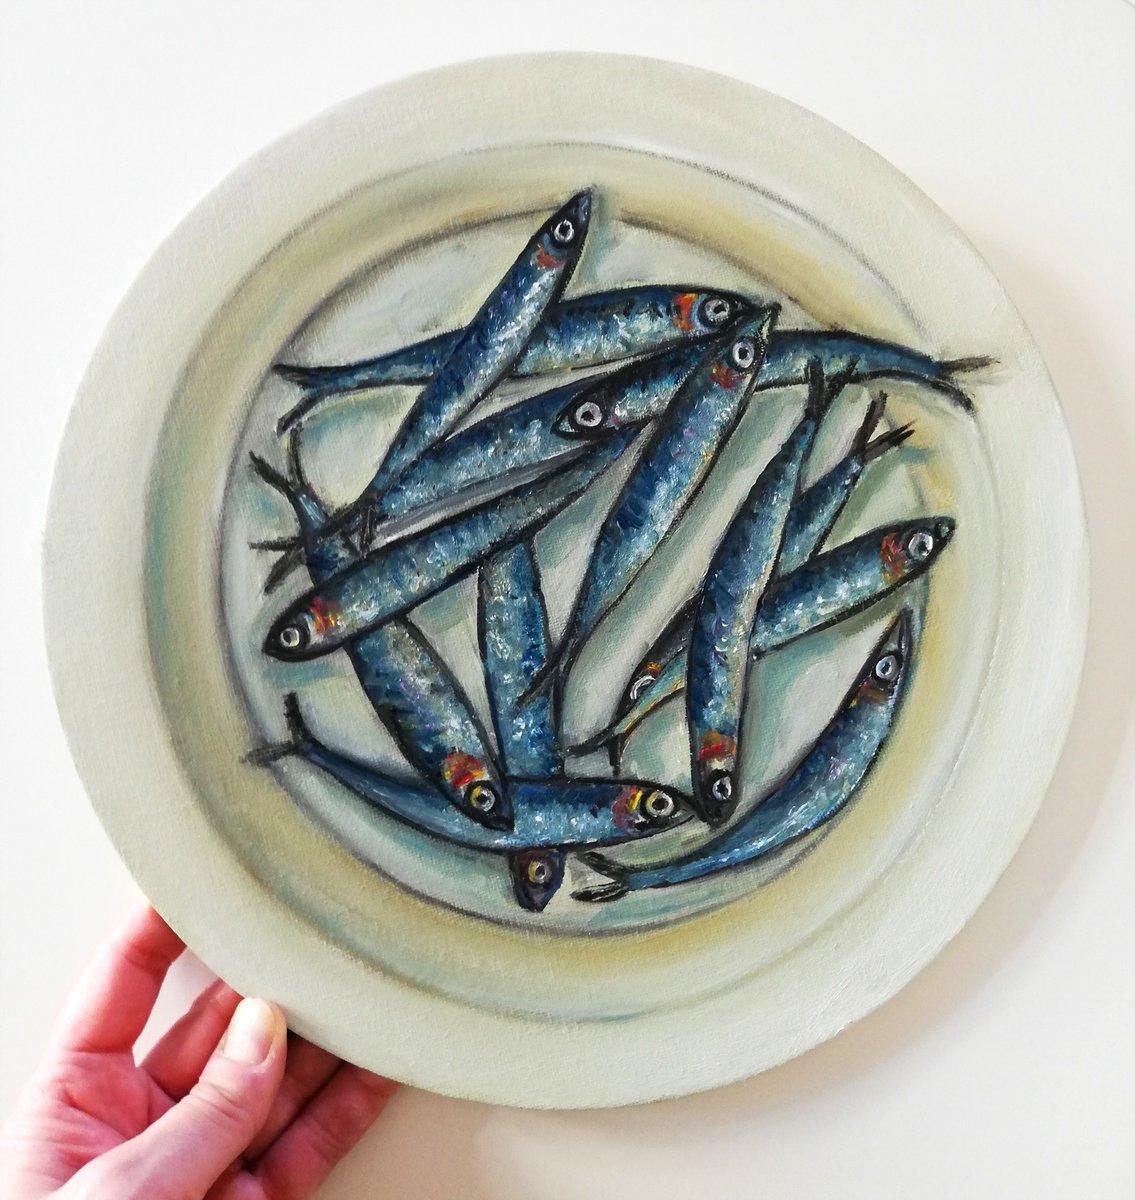 Anchovies in a Plate Original Oil on Round Canvas Board Painting 12 by 12 inches (30x30... by Katia Ricci